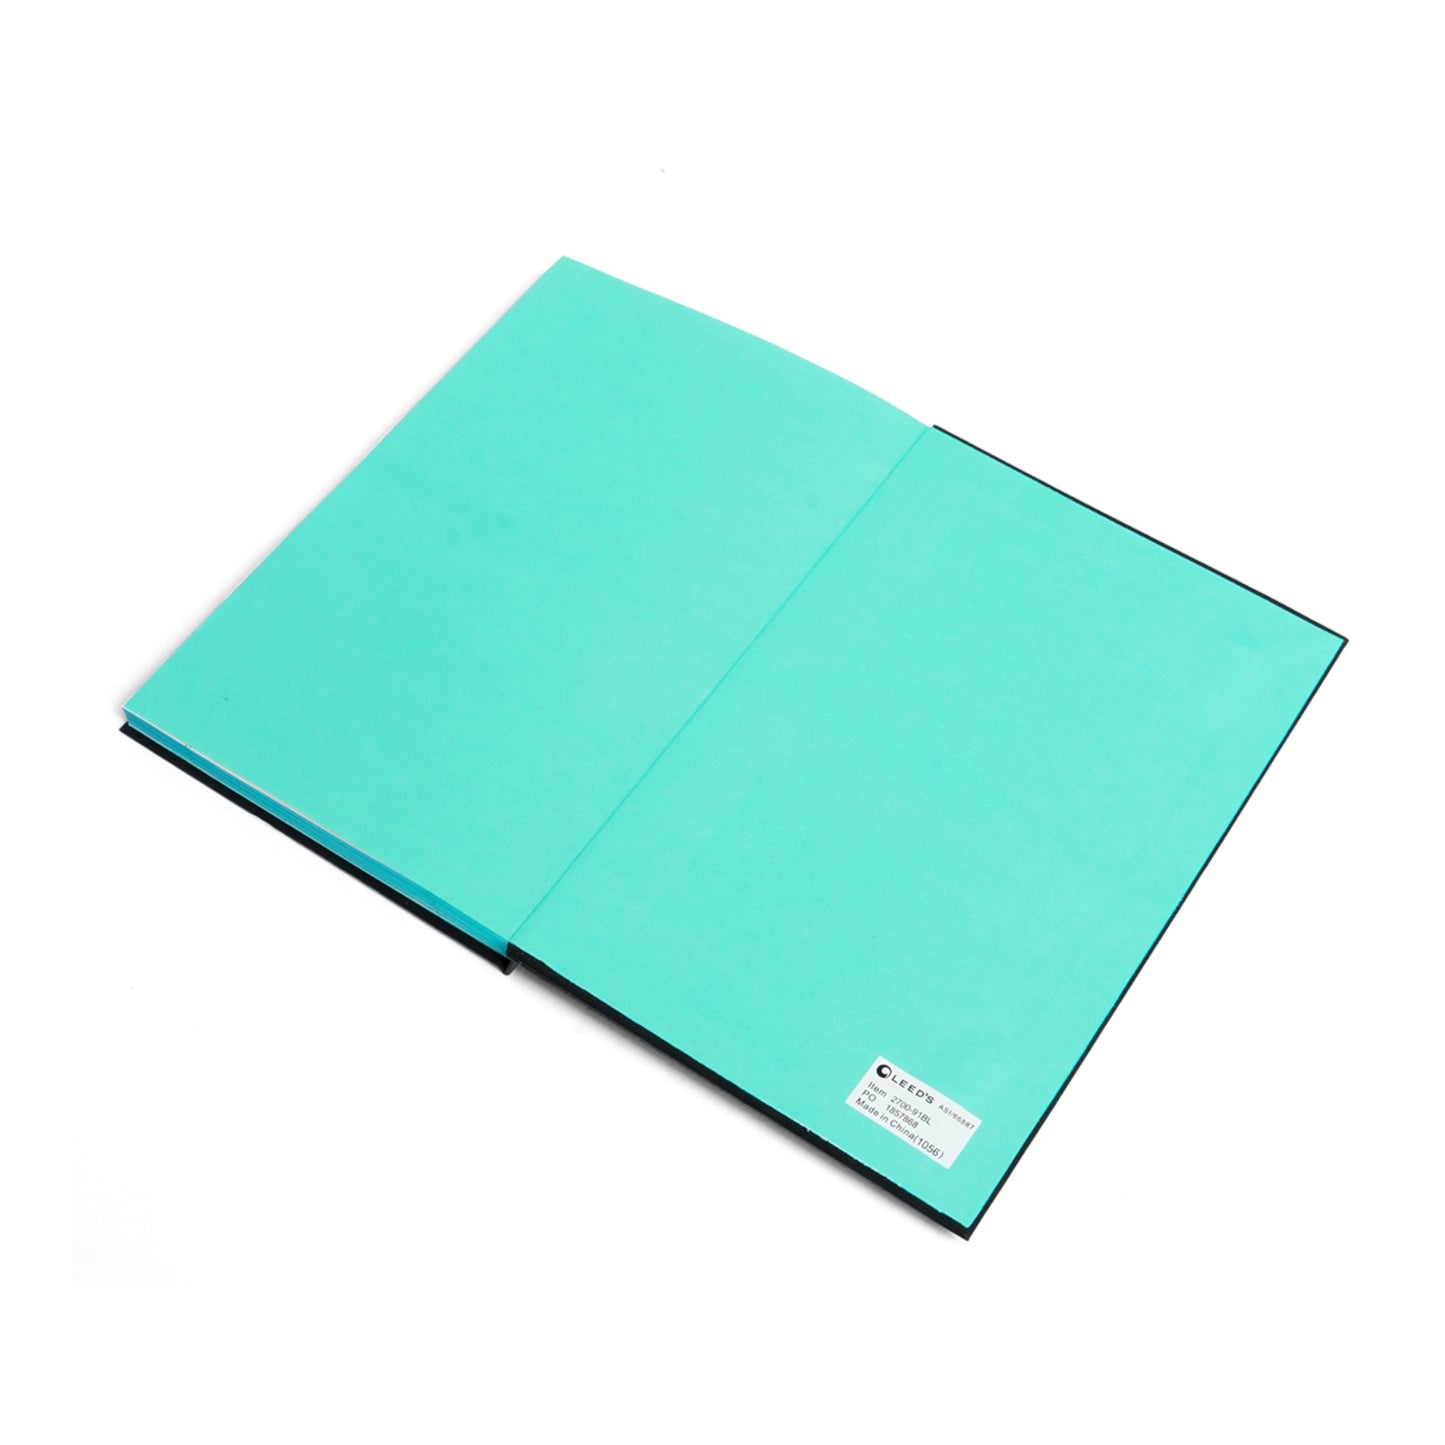 "Rhythmic Reflections" Color Contrast Notebook - Ruled